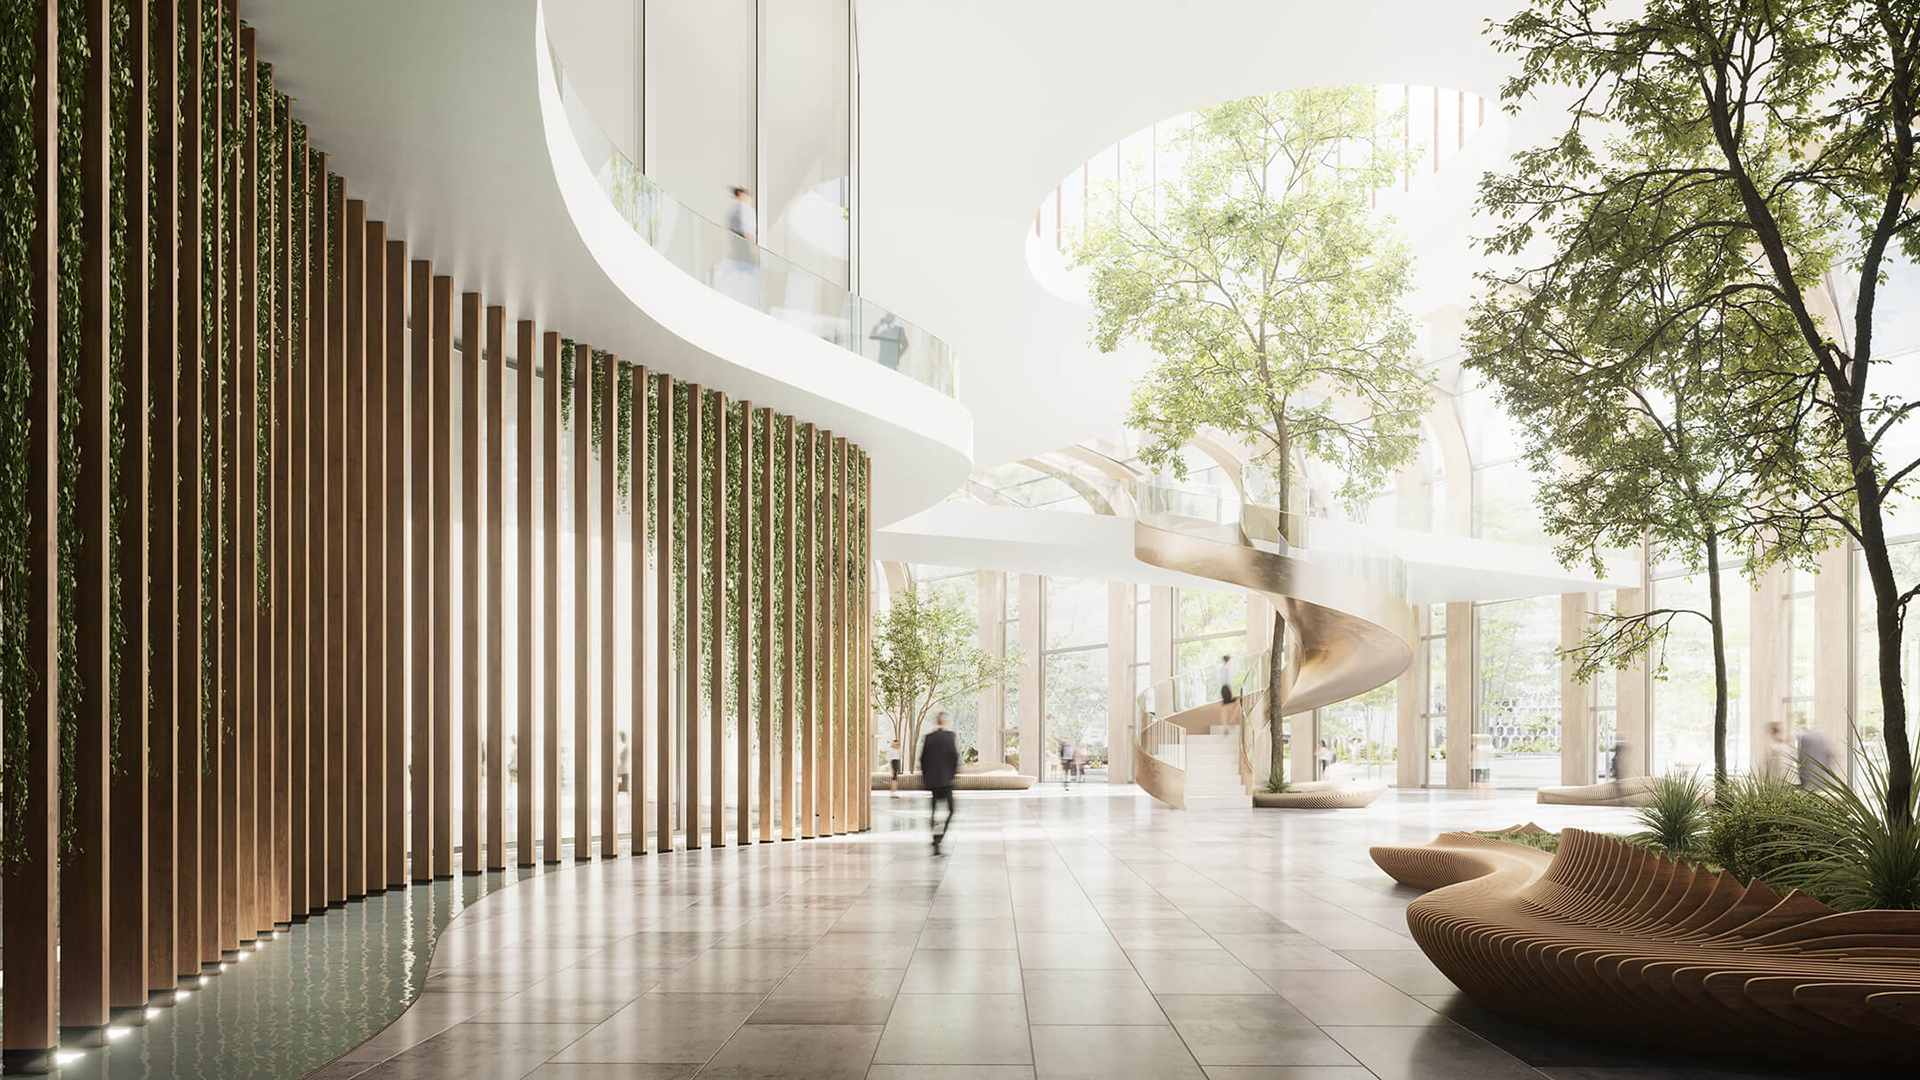 3D Interior Visualization of a Business Center Entrance Hall